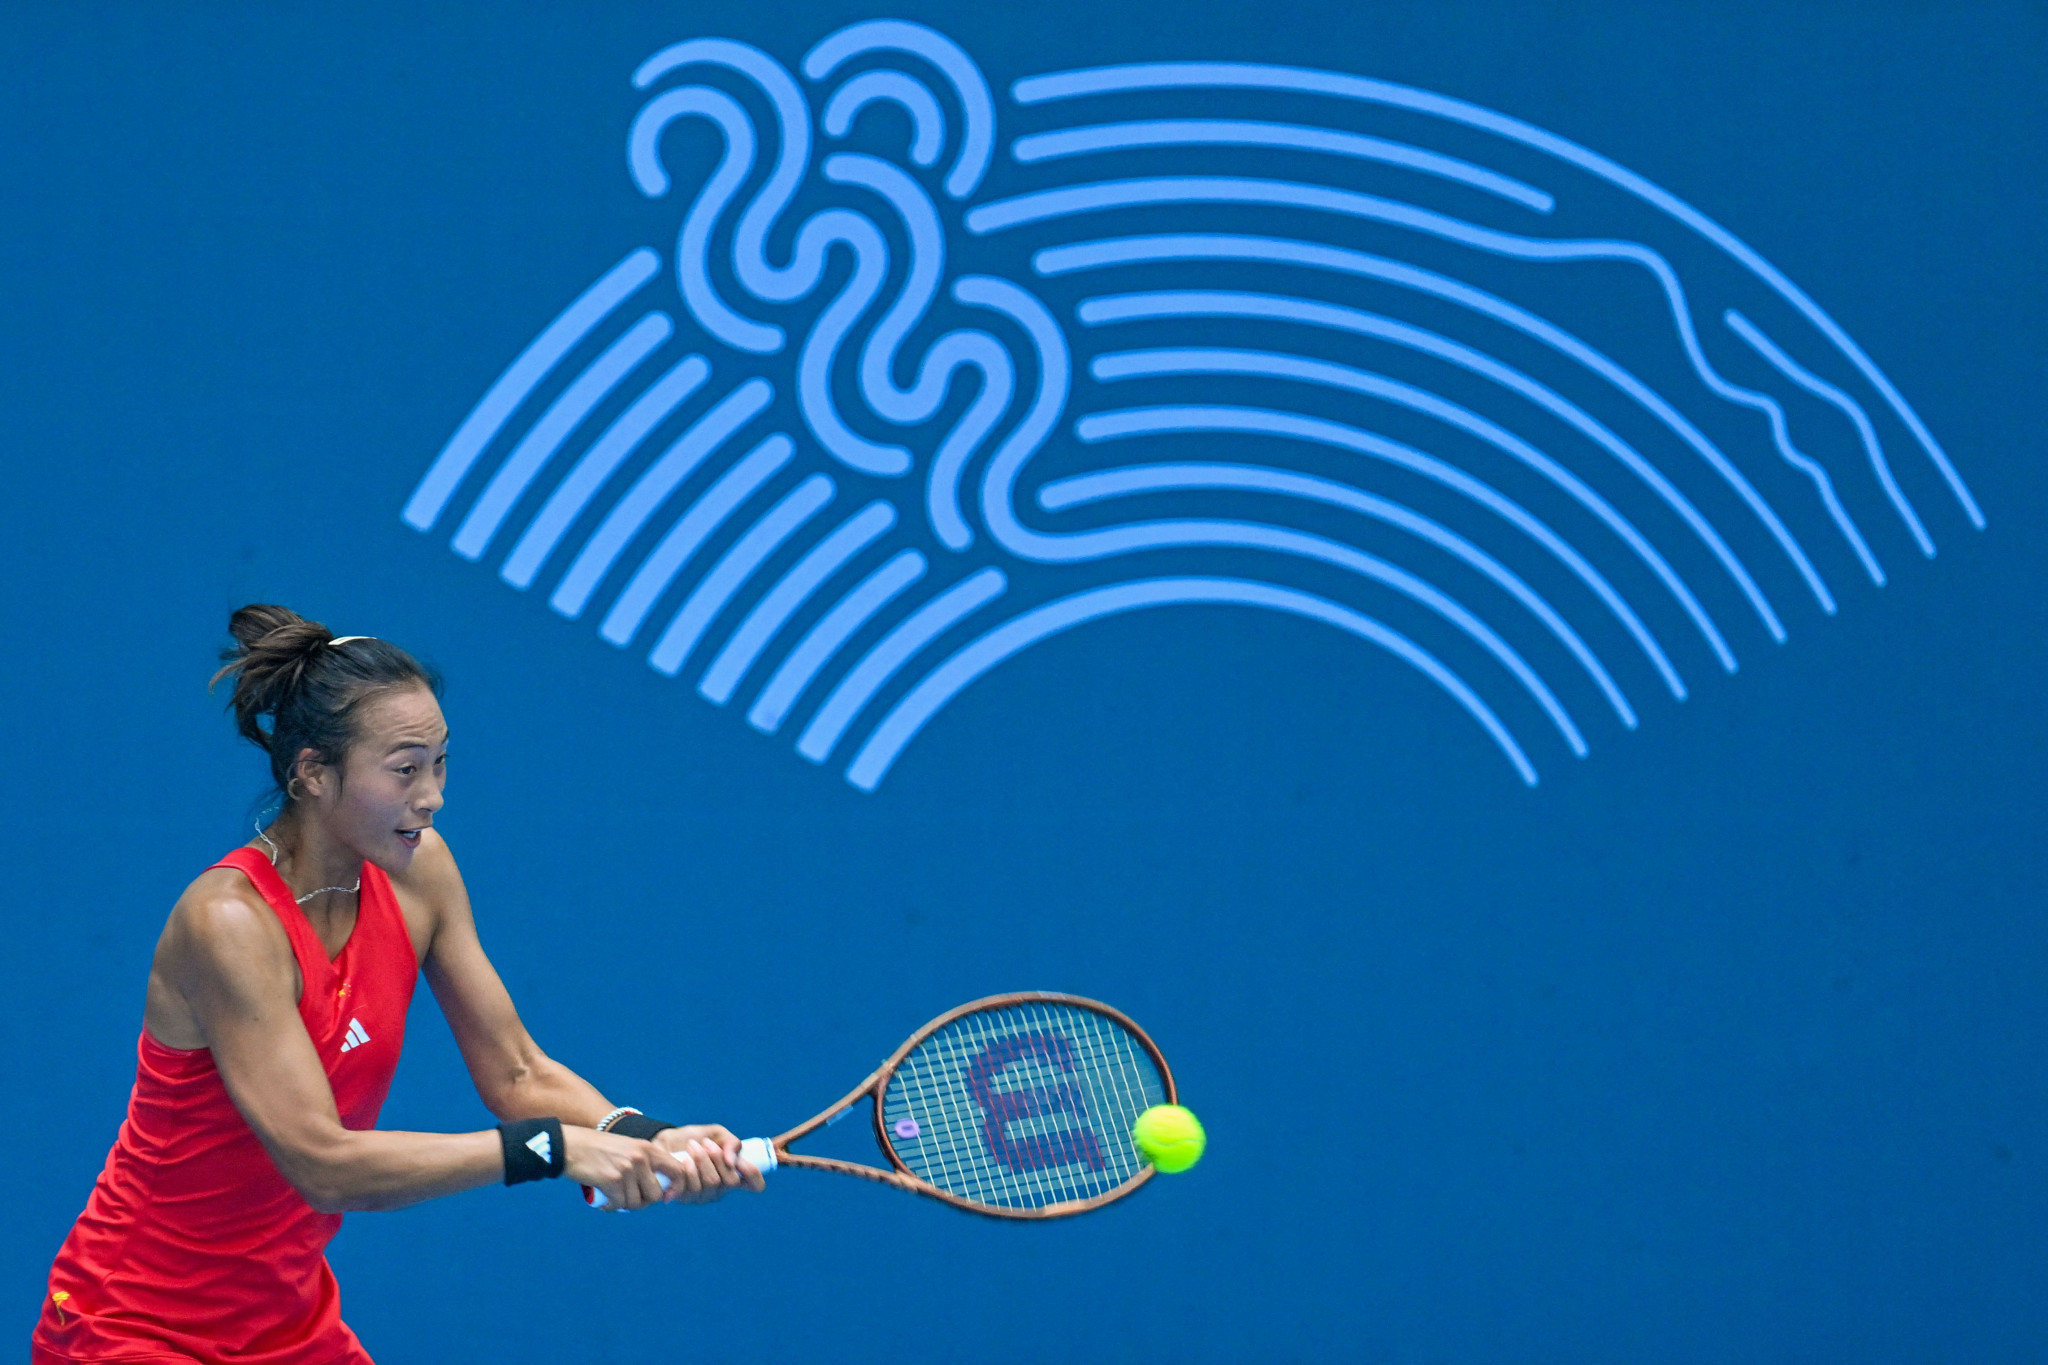 Zheng Qinwen, pictured, became the women's tennis singles champion in an all-Chinese final after taking a 6-2, 6-4 victory over Zhu Lin ©Getty Images